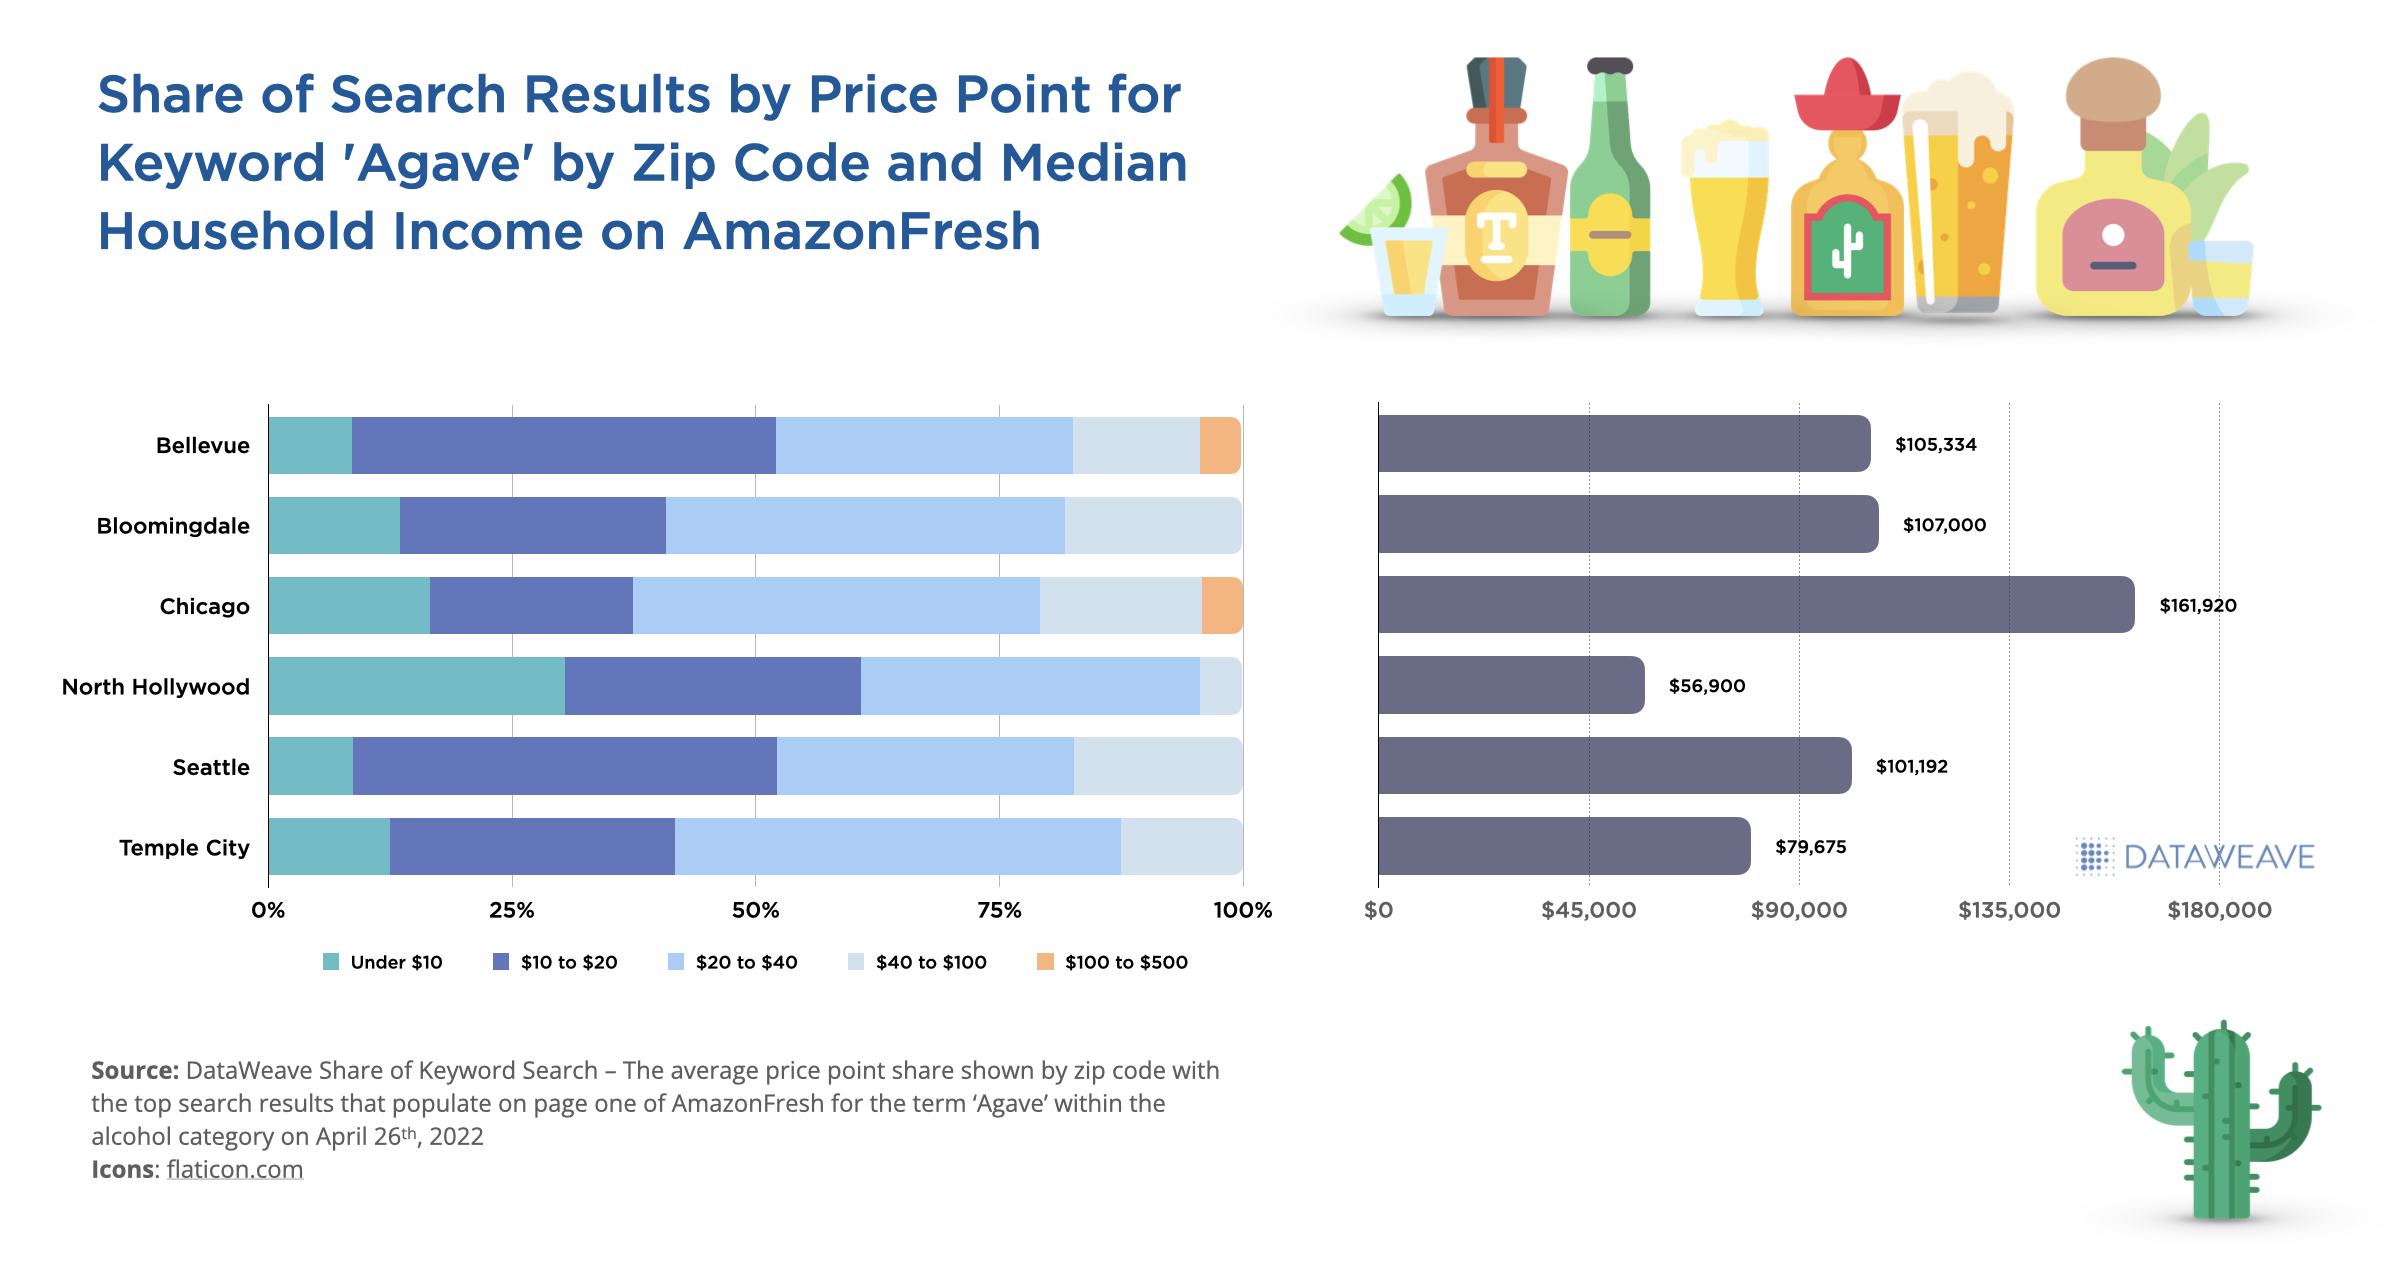 Share of Search for Alcohol by Price Point and Zip Code on AmazonFresh